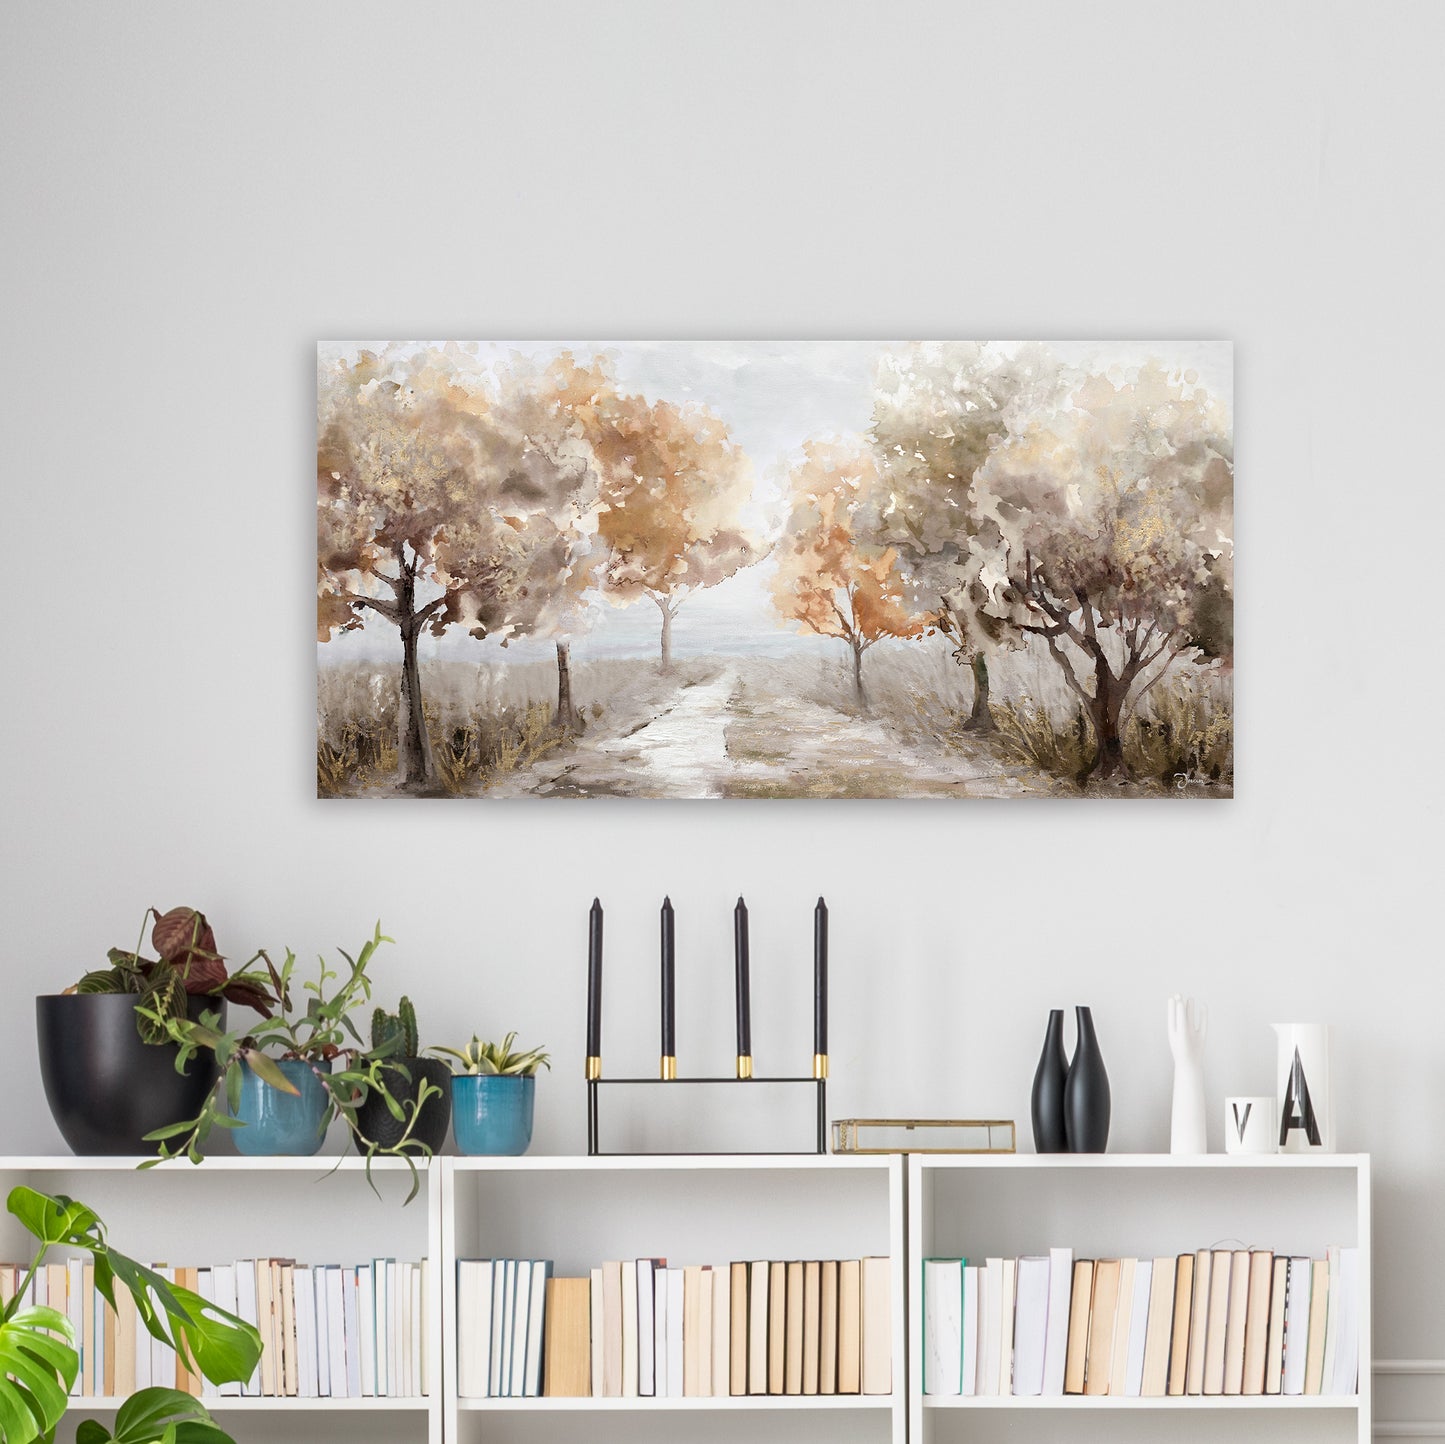 Country path - Oil Painting on Wrapped Canvas, Wall art for living room, bedroom, office